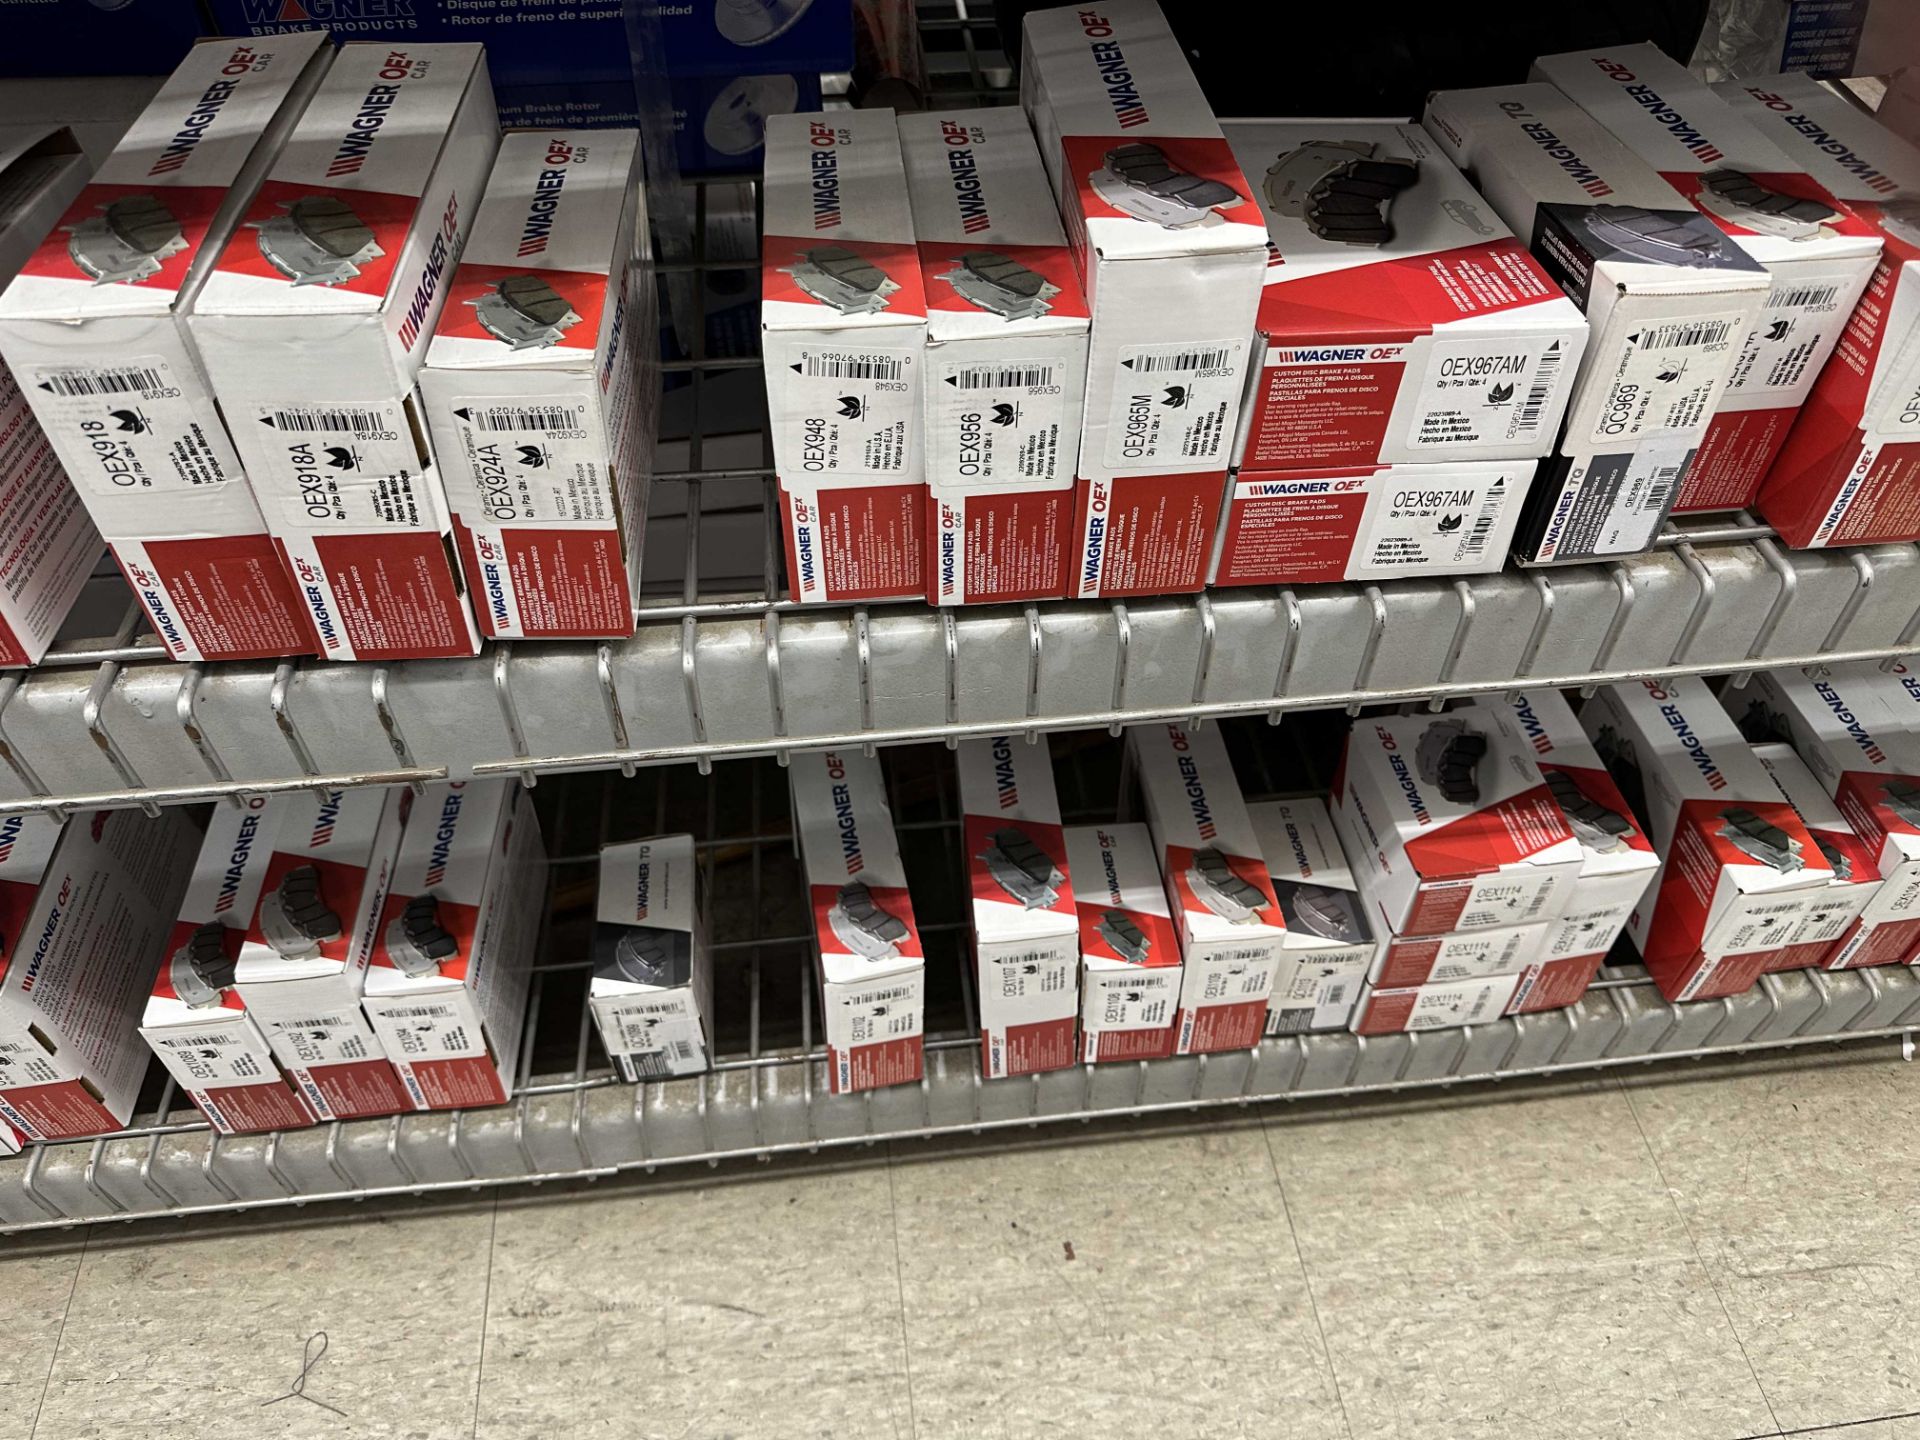 {LOT} Wagner OEX Brake Pads Appx. (198) Sets @ 5700 Wholesale Cost on ( 6) Shelves ( All Red Boxes )